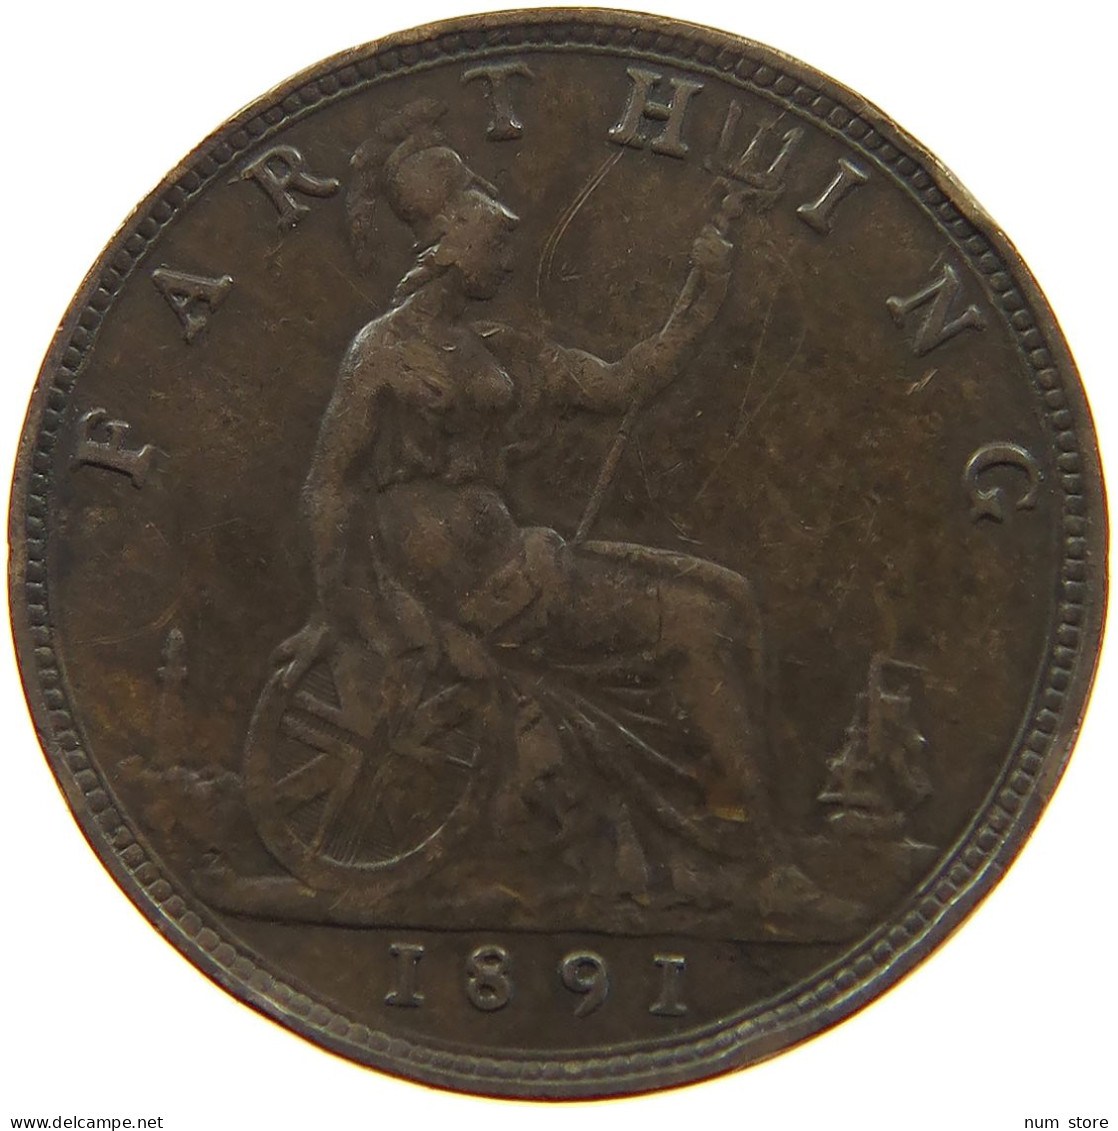 GREAT BRITAIN FARTHING 1891 Victoria 1837-1901 #a011 0829 - B. 1 Farthing